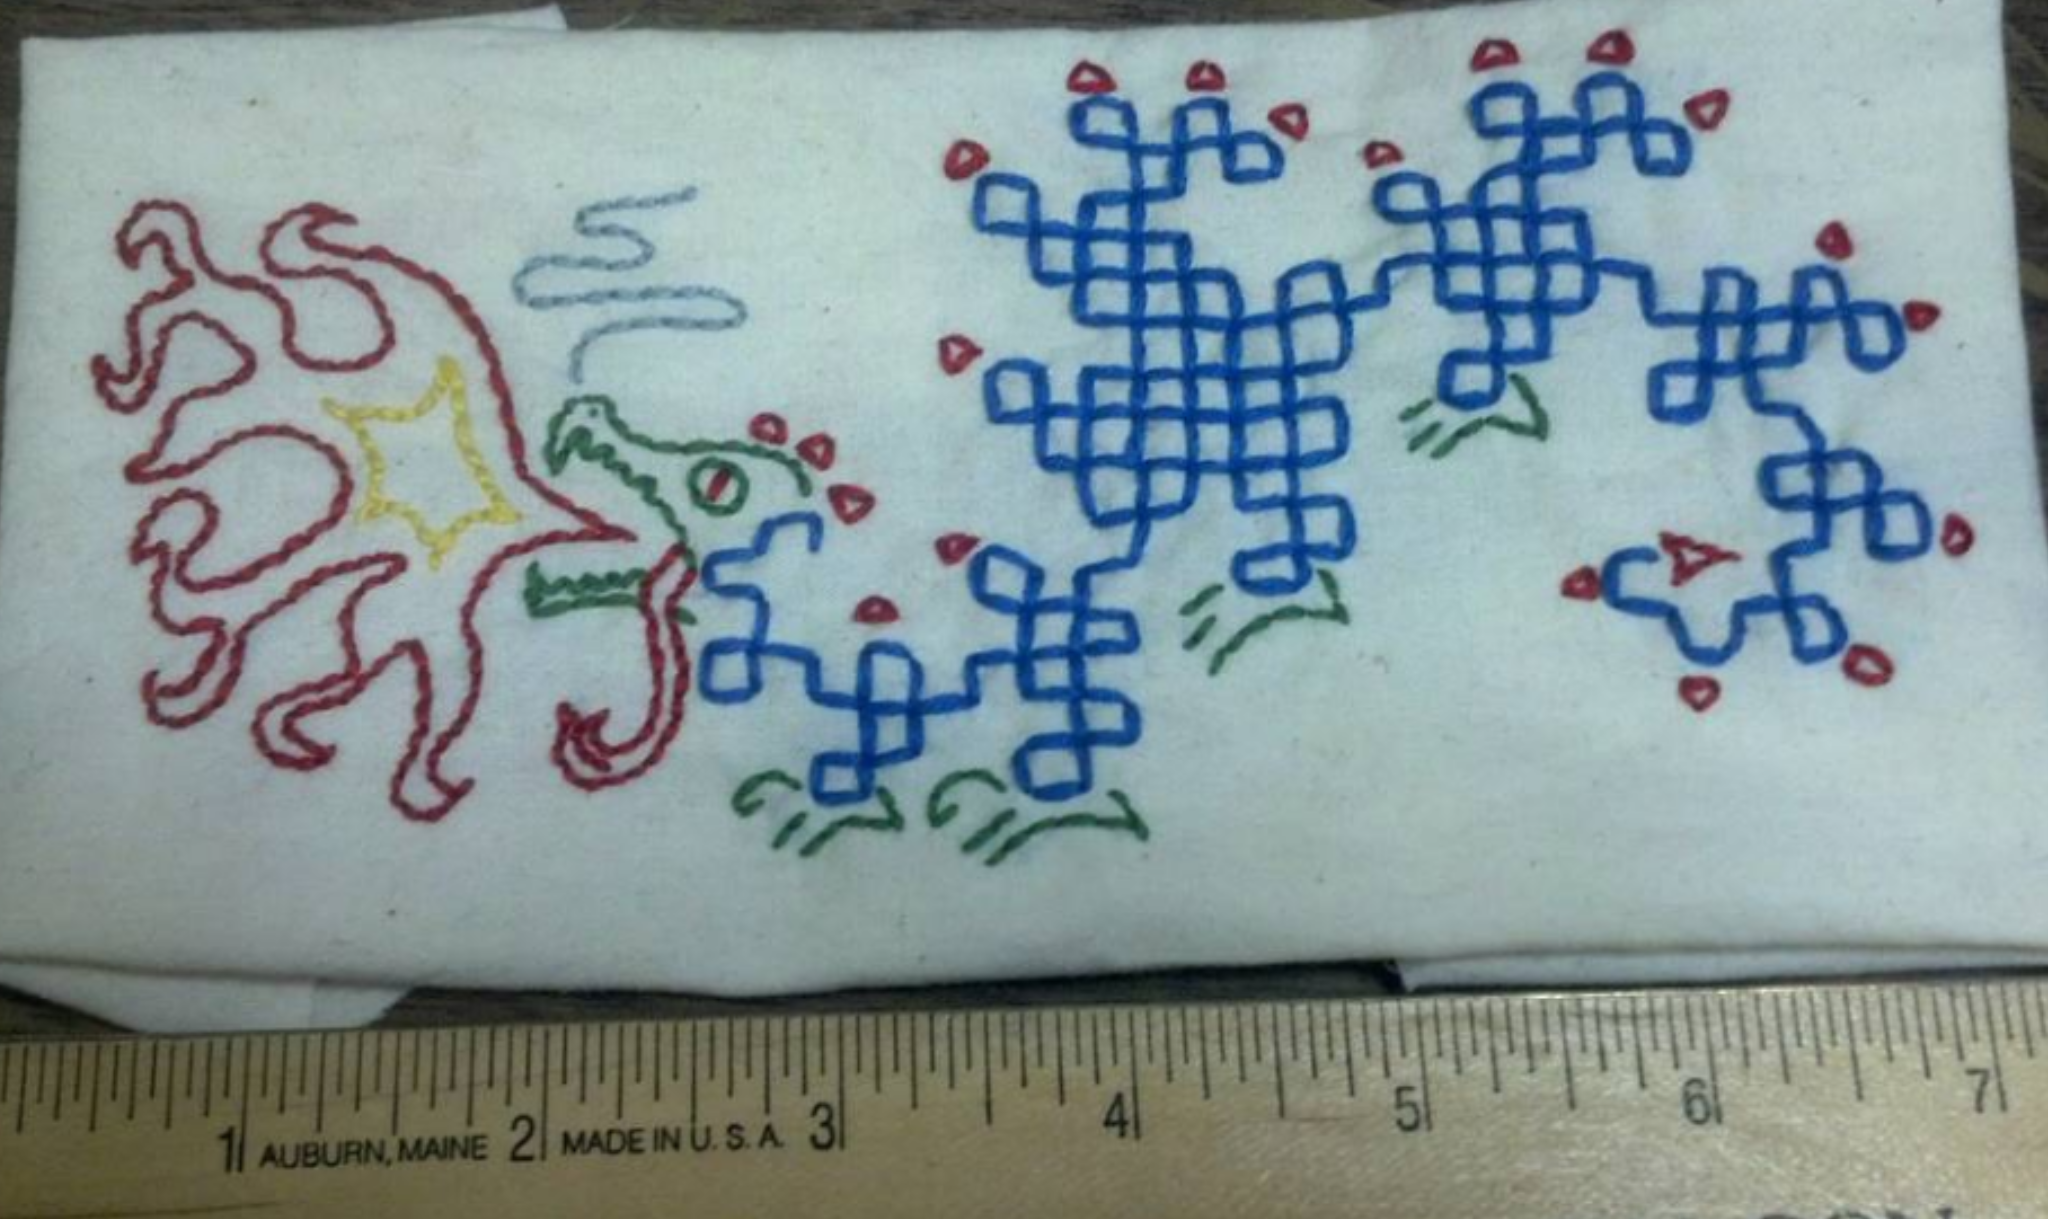 Dragon curve fractal embroidered onto a patch and embellished with a dragon head, claws, and spines.